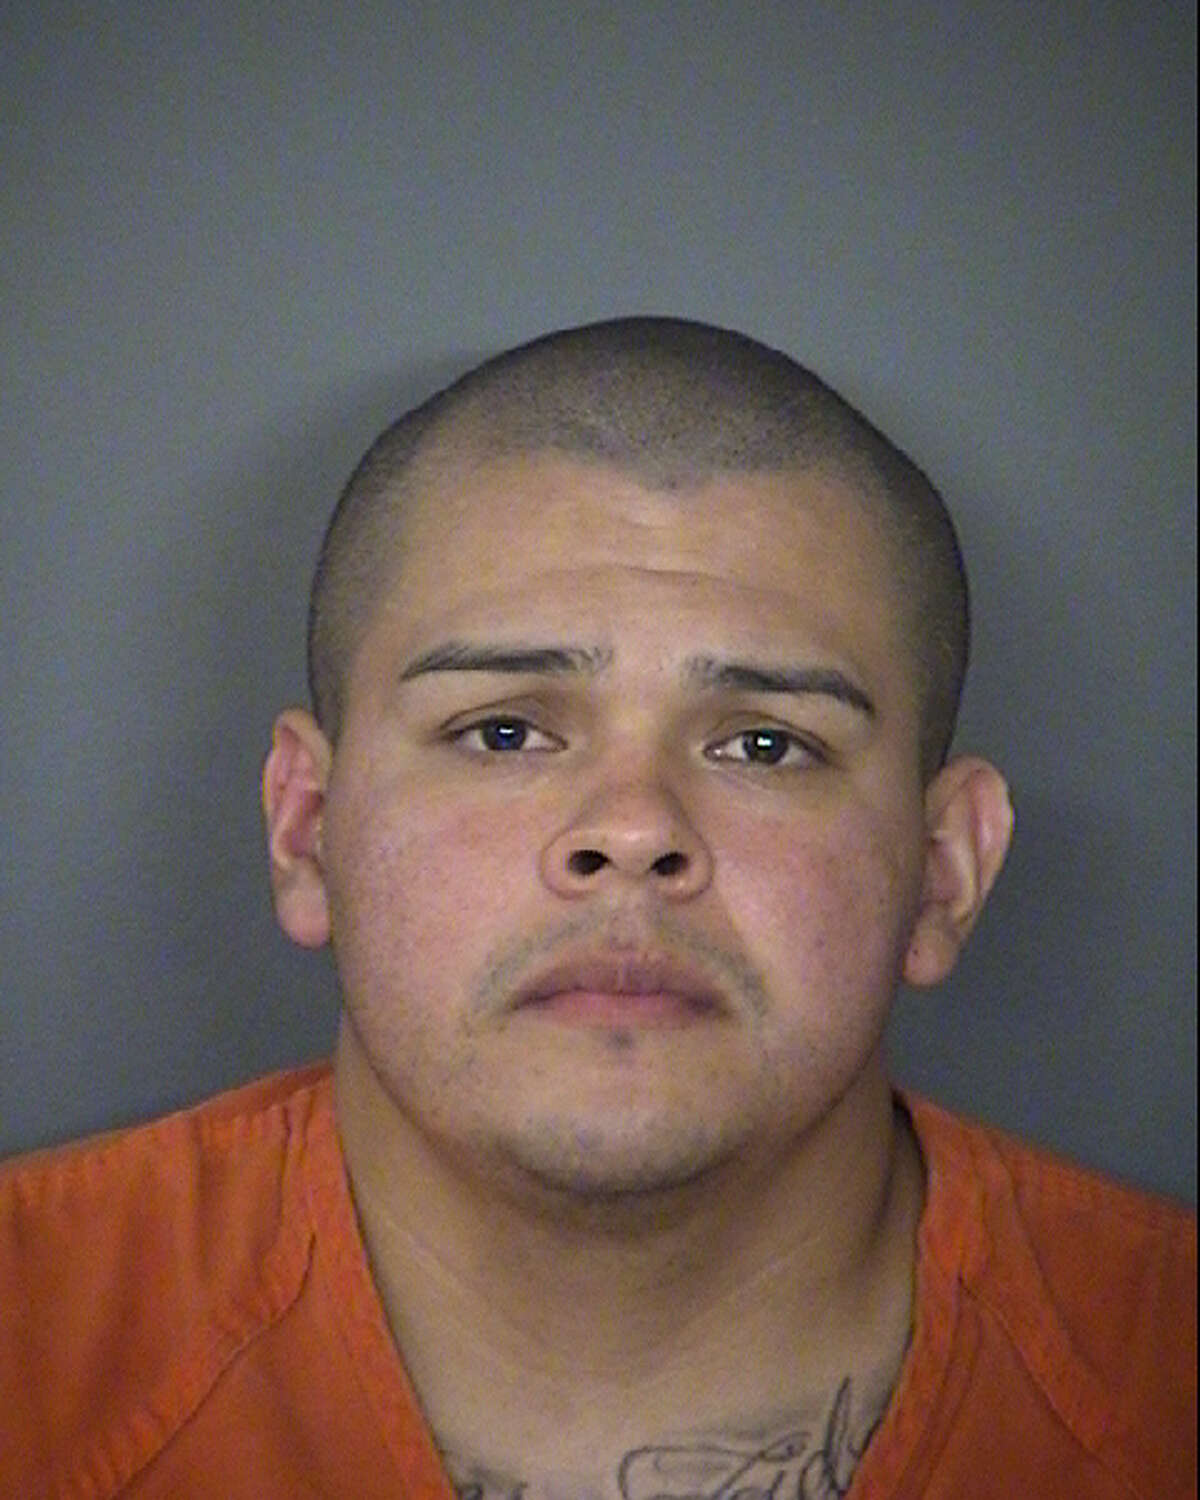 The Bexar County Sheriff's Office is conducted an internal investigation after San Antonio police arrested David J. Ramos, a 28-year-old Bexar County detention deputy, early Sunday morning for allegedly damaging his ex-girlfriend's car. Ramos has been charged with criminal mischief $50-500, a Class B misdemeanor, and released from Bexar County Jail on a $1,000 bond.